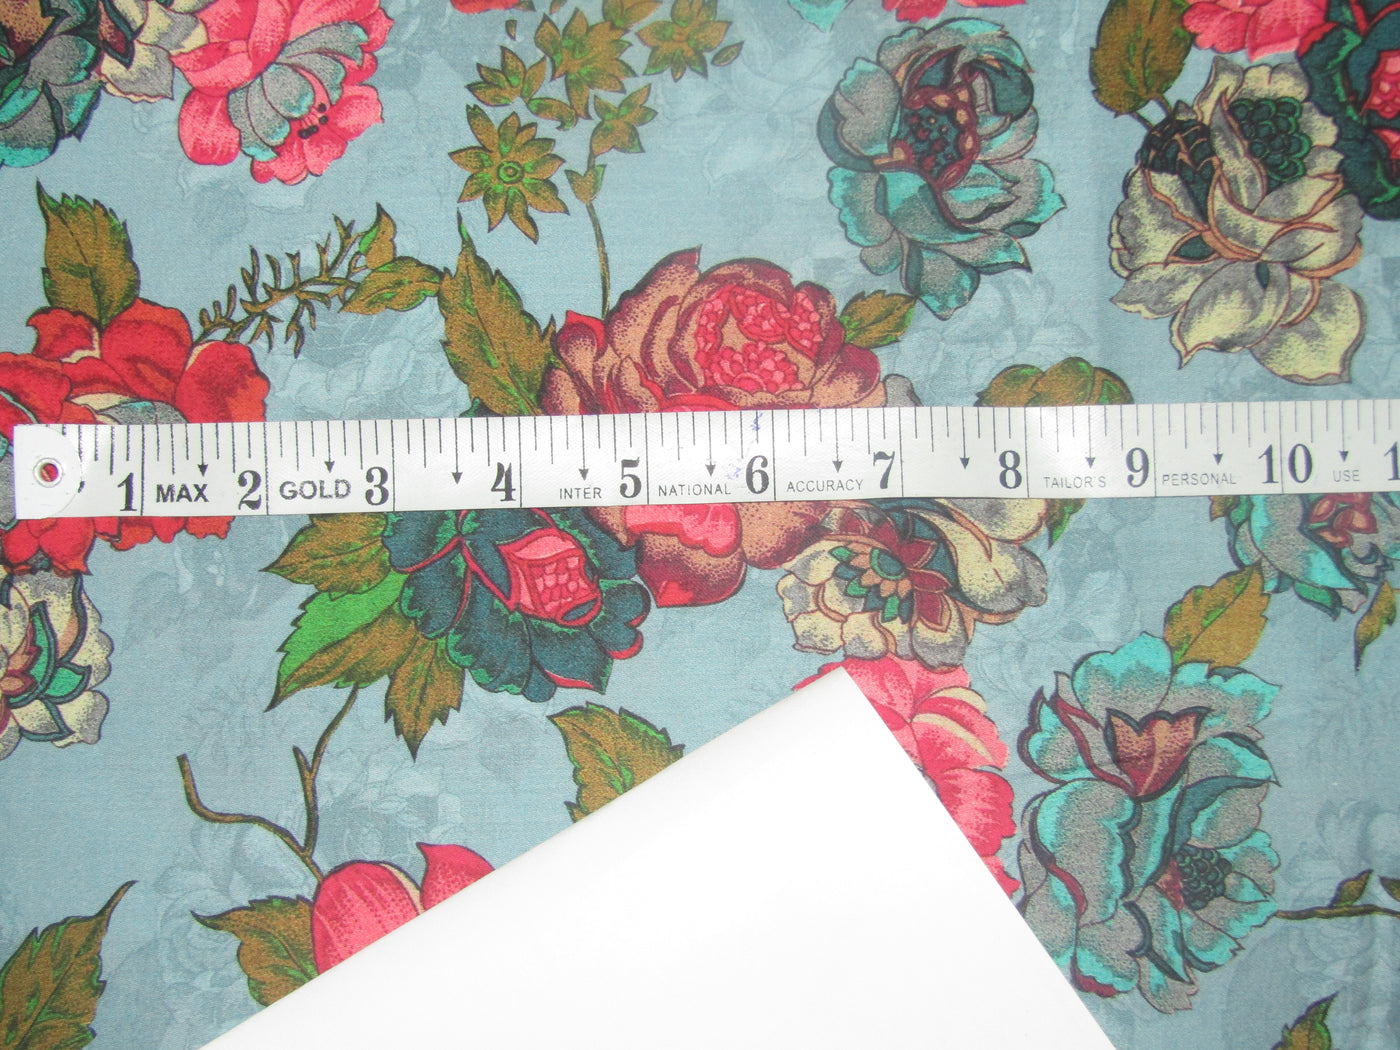 100% Glazed cotton Floral digital prints 44" wide available in five varieties [12811-12815]